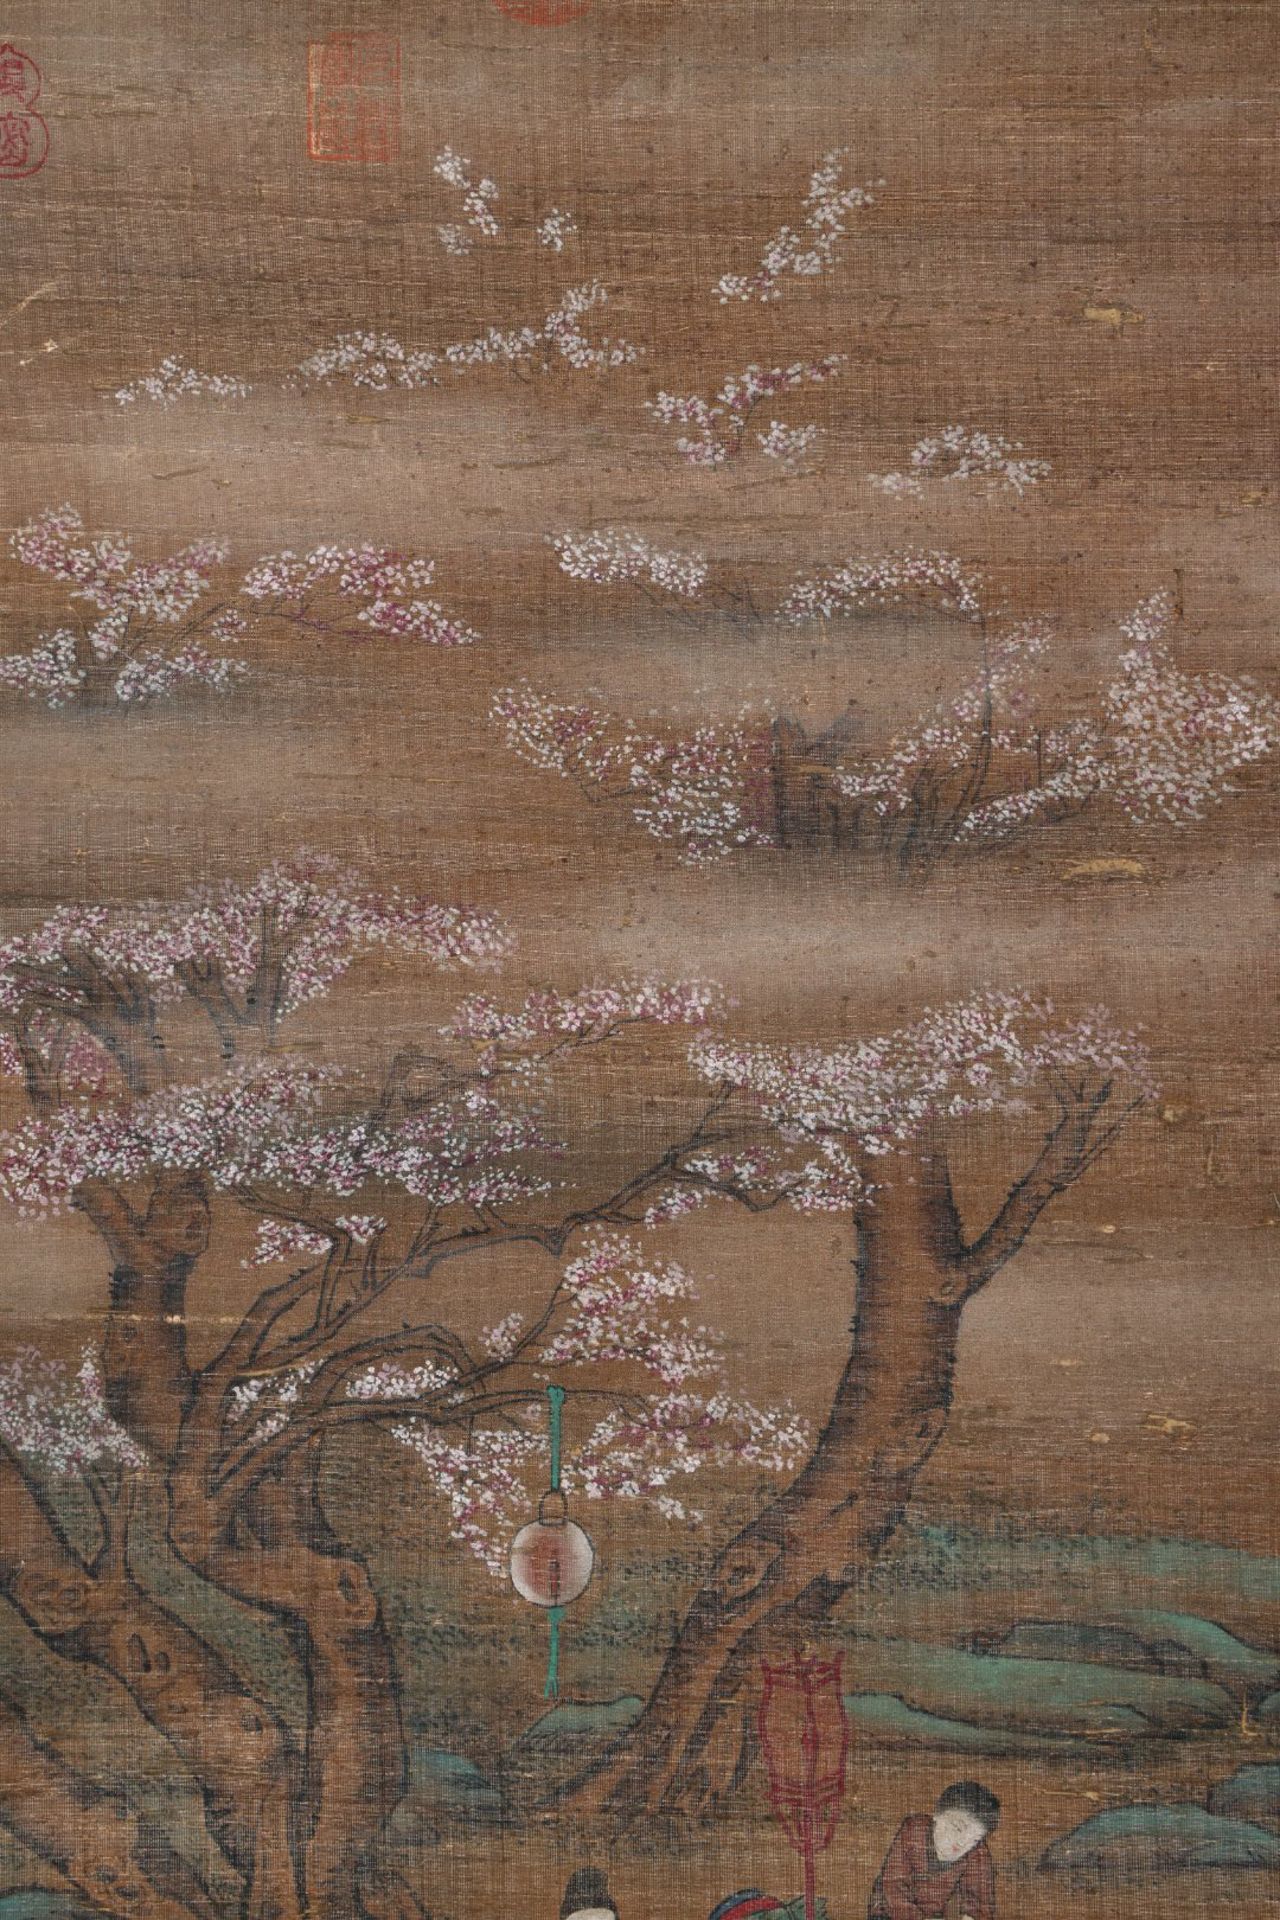 A Chinese Scroll Painting By Gu Hongzhong - Image 4 of 10